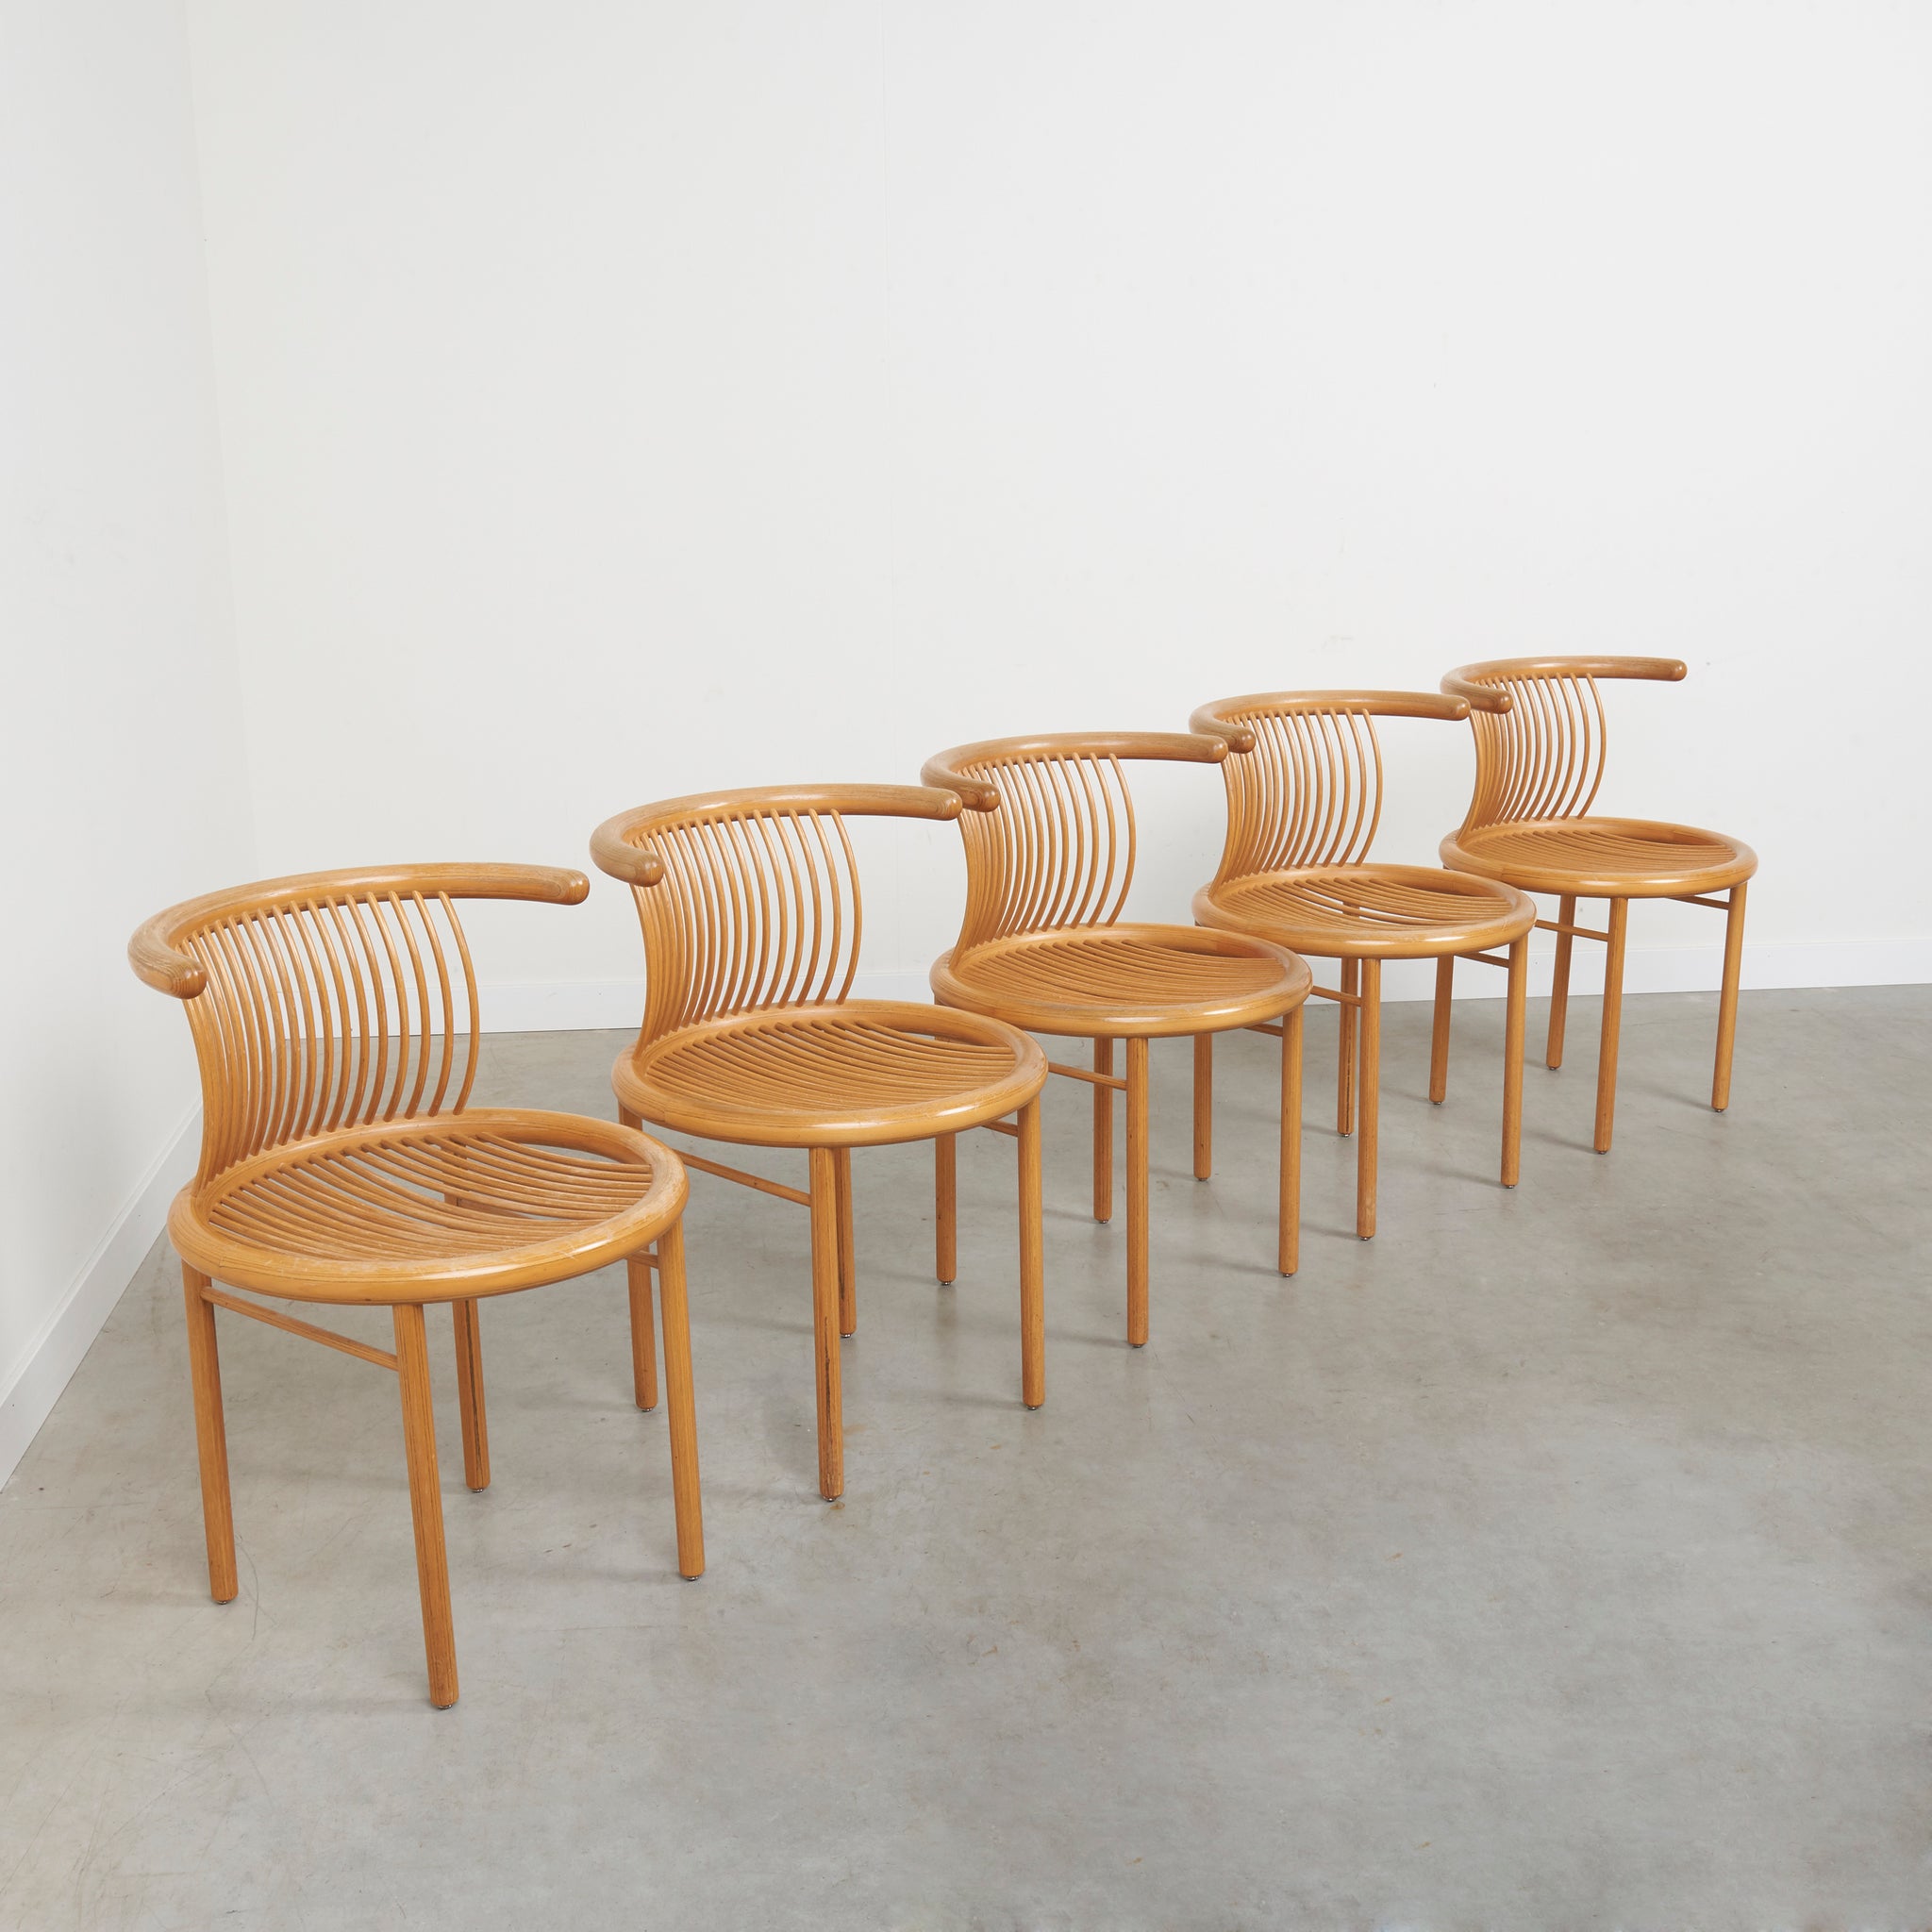 Vintage dining chairs by Herbert Ohl for Lübke, 1980s